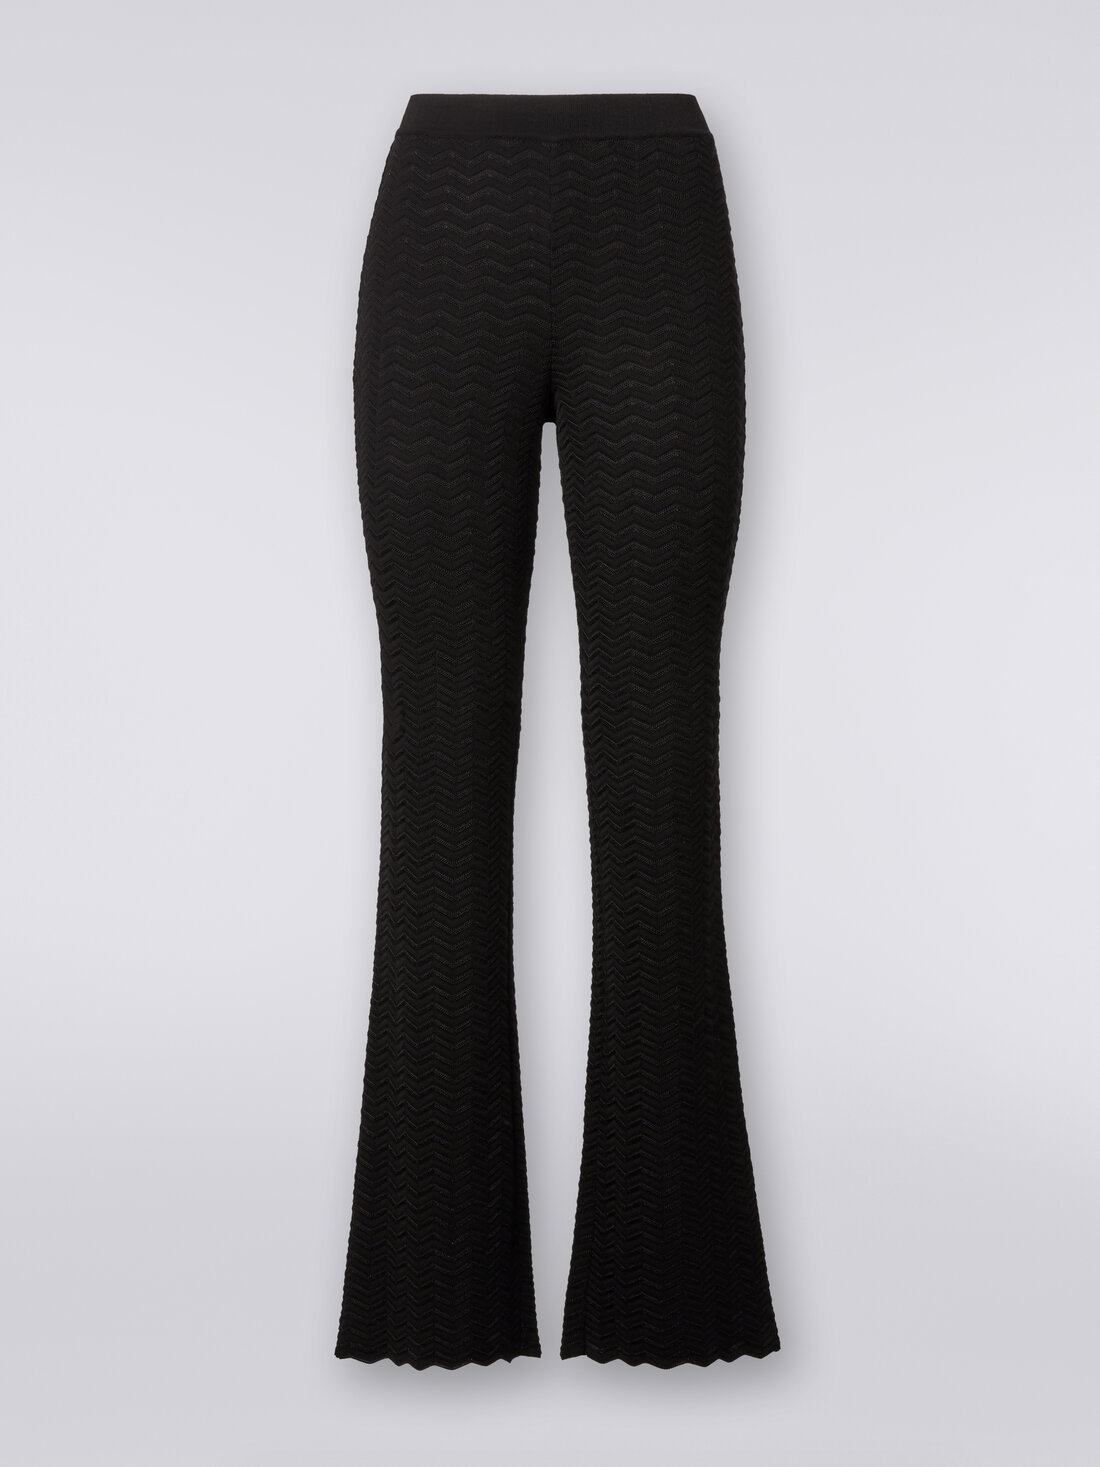 Trousers in zigzag knit  , Black    - DS24SI0NBK033W93911 - 0